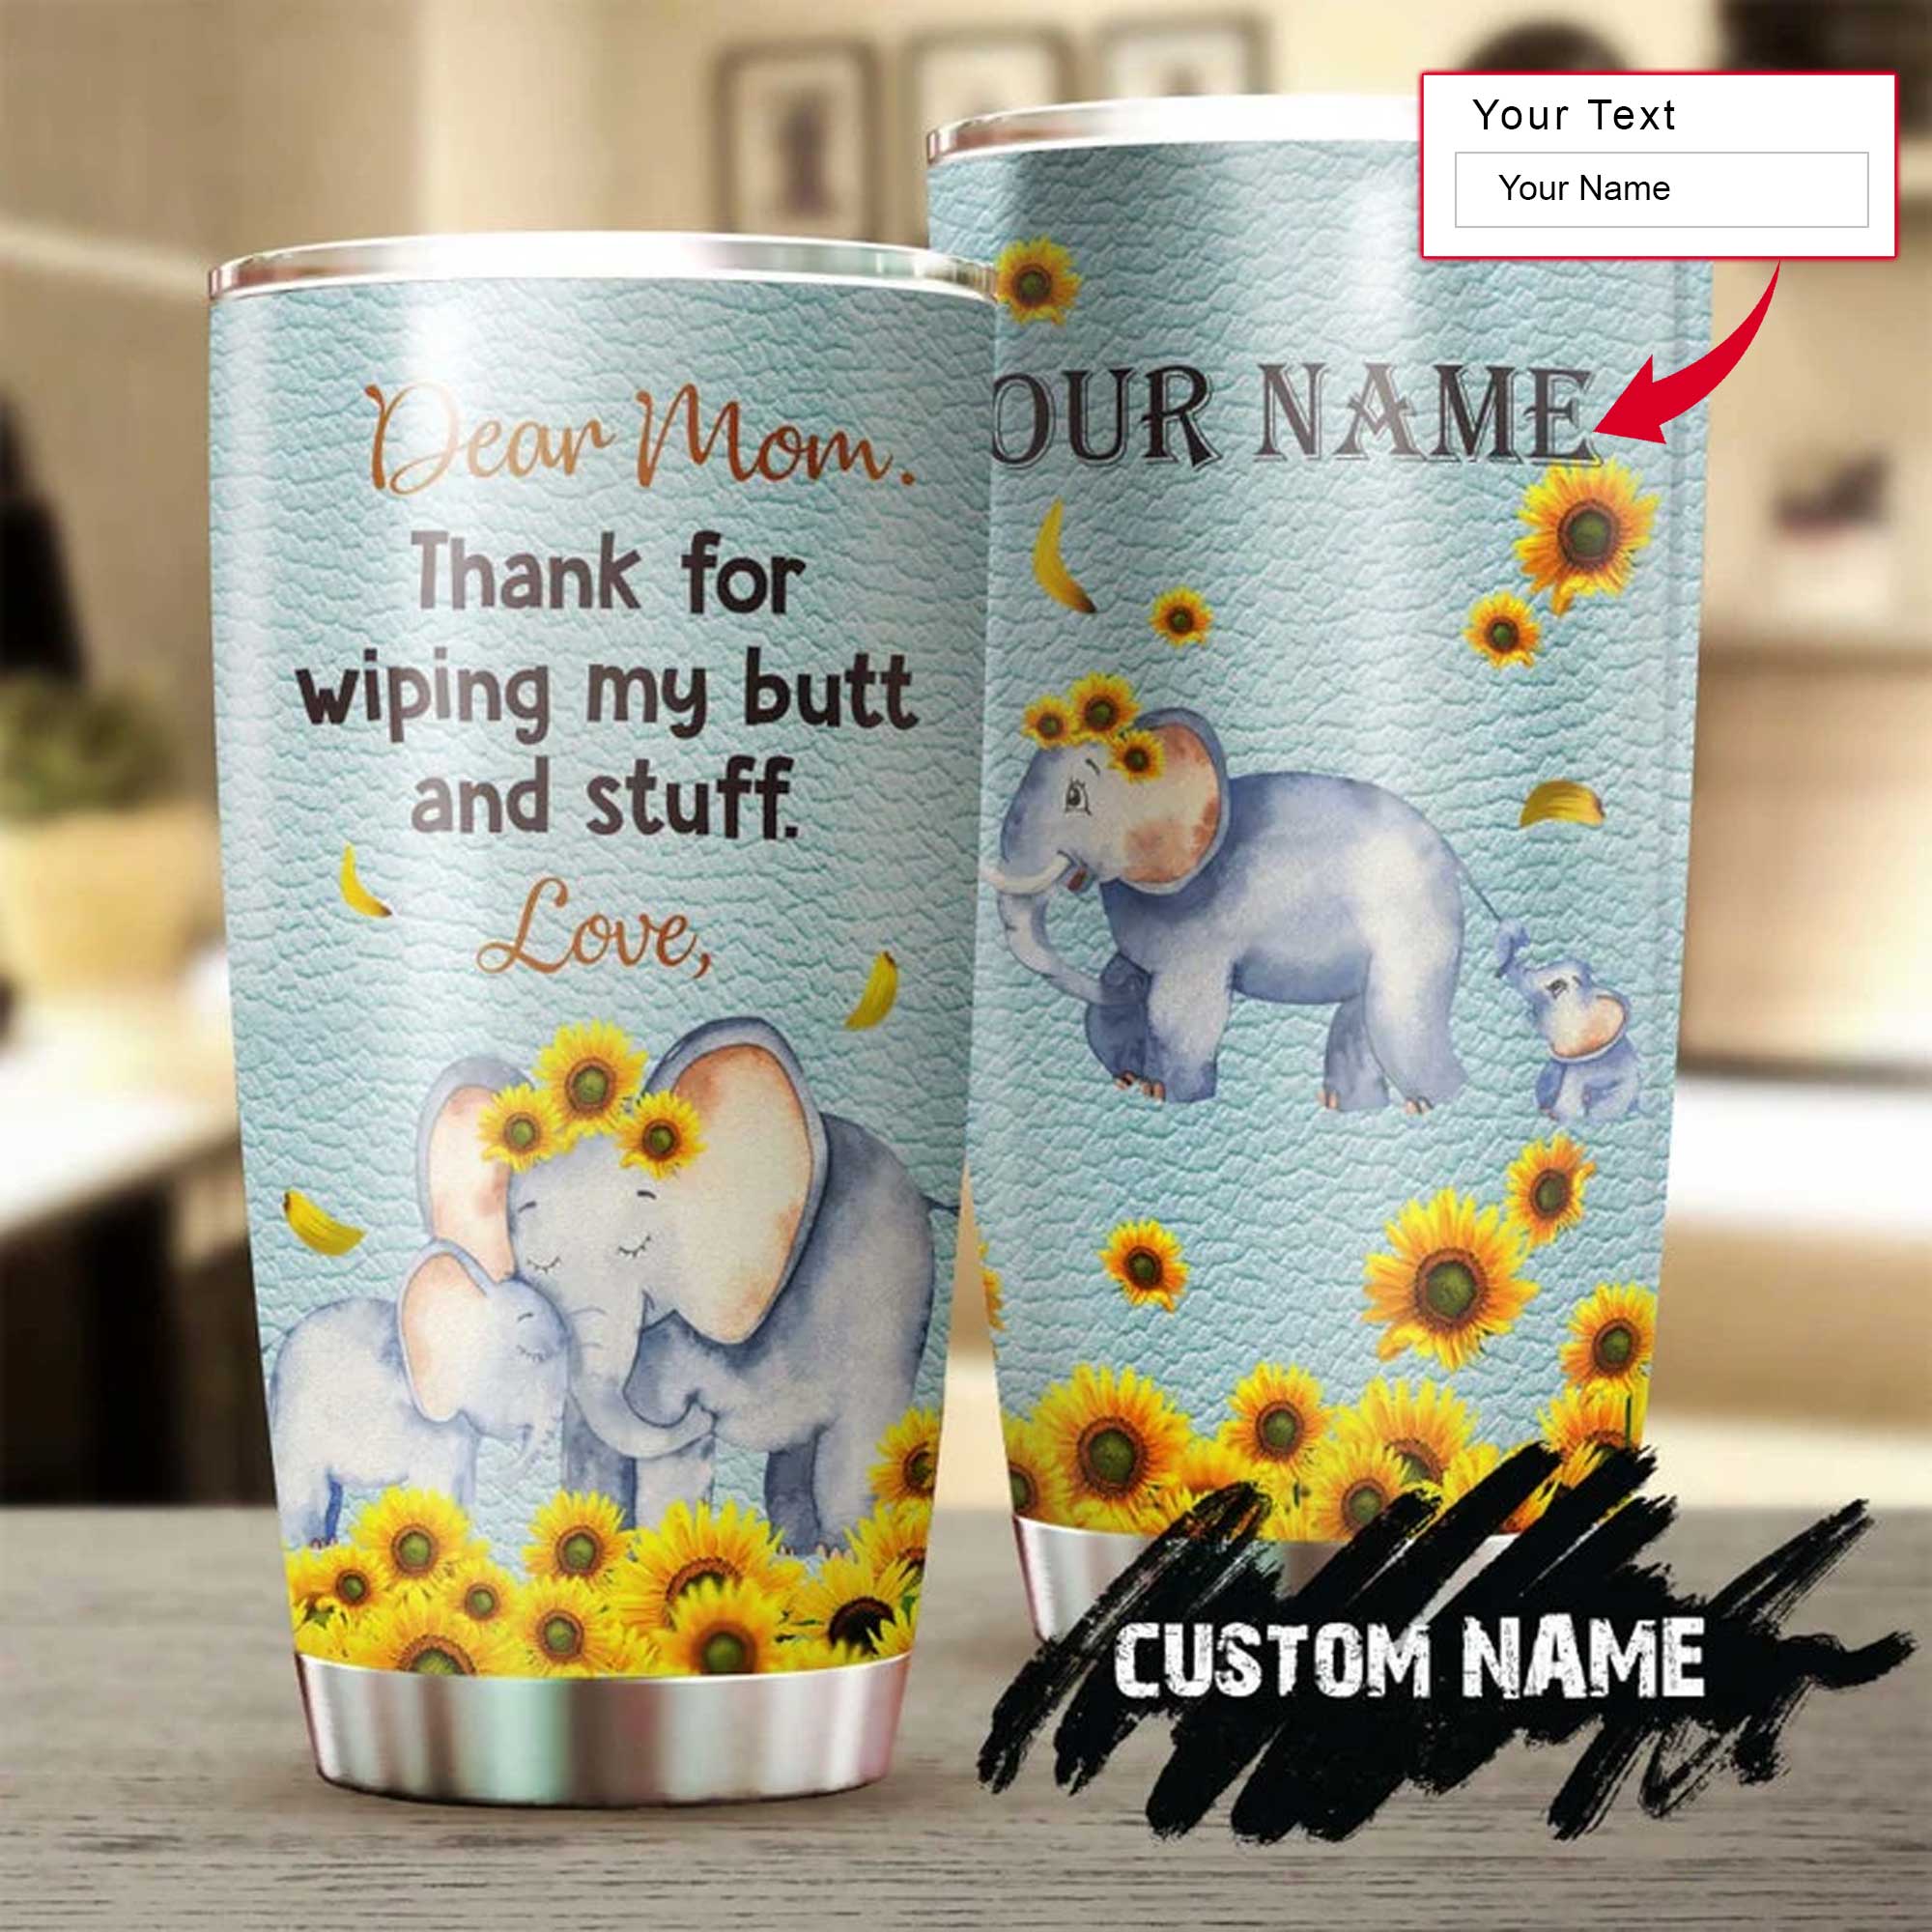 Personalized Mother's Day Gift Tumbler - Custom Gift For Mother's Day, Presents For Mom From Daughter Son - Elephant Tumbler, Dear Mom Thanks Tumbler